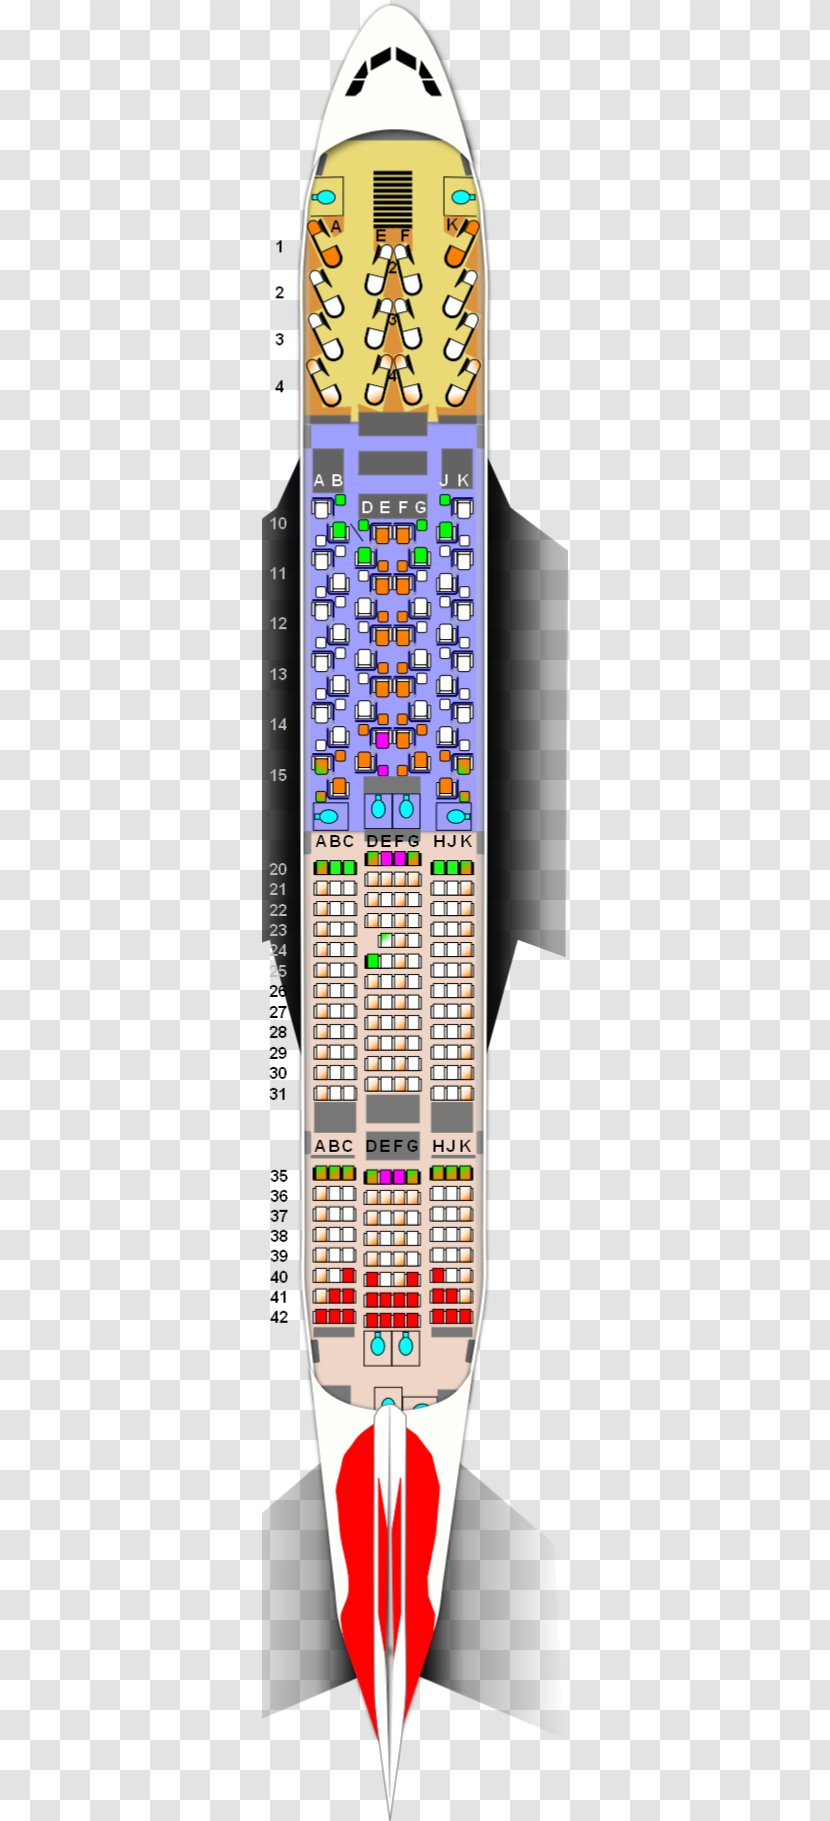 Graphic Design Pattern - Symmetry - Airplane Seat Transparent PNG